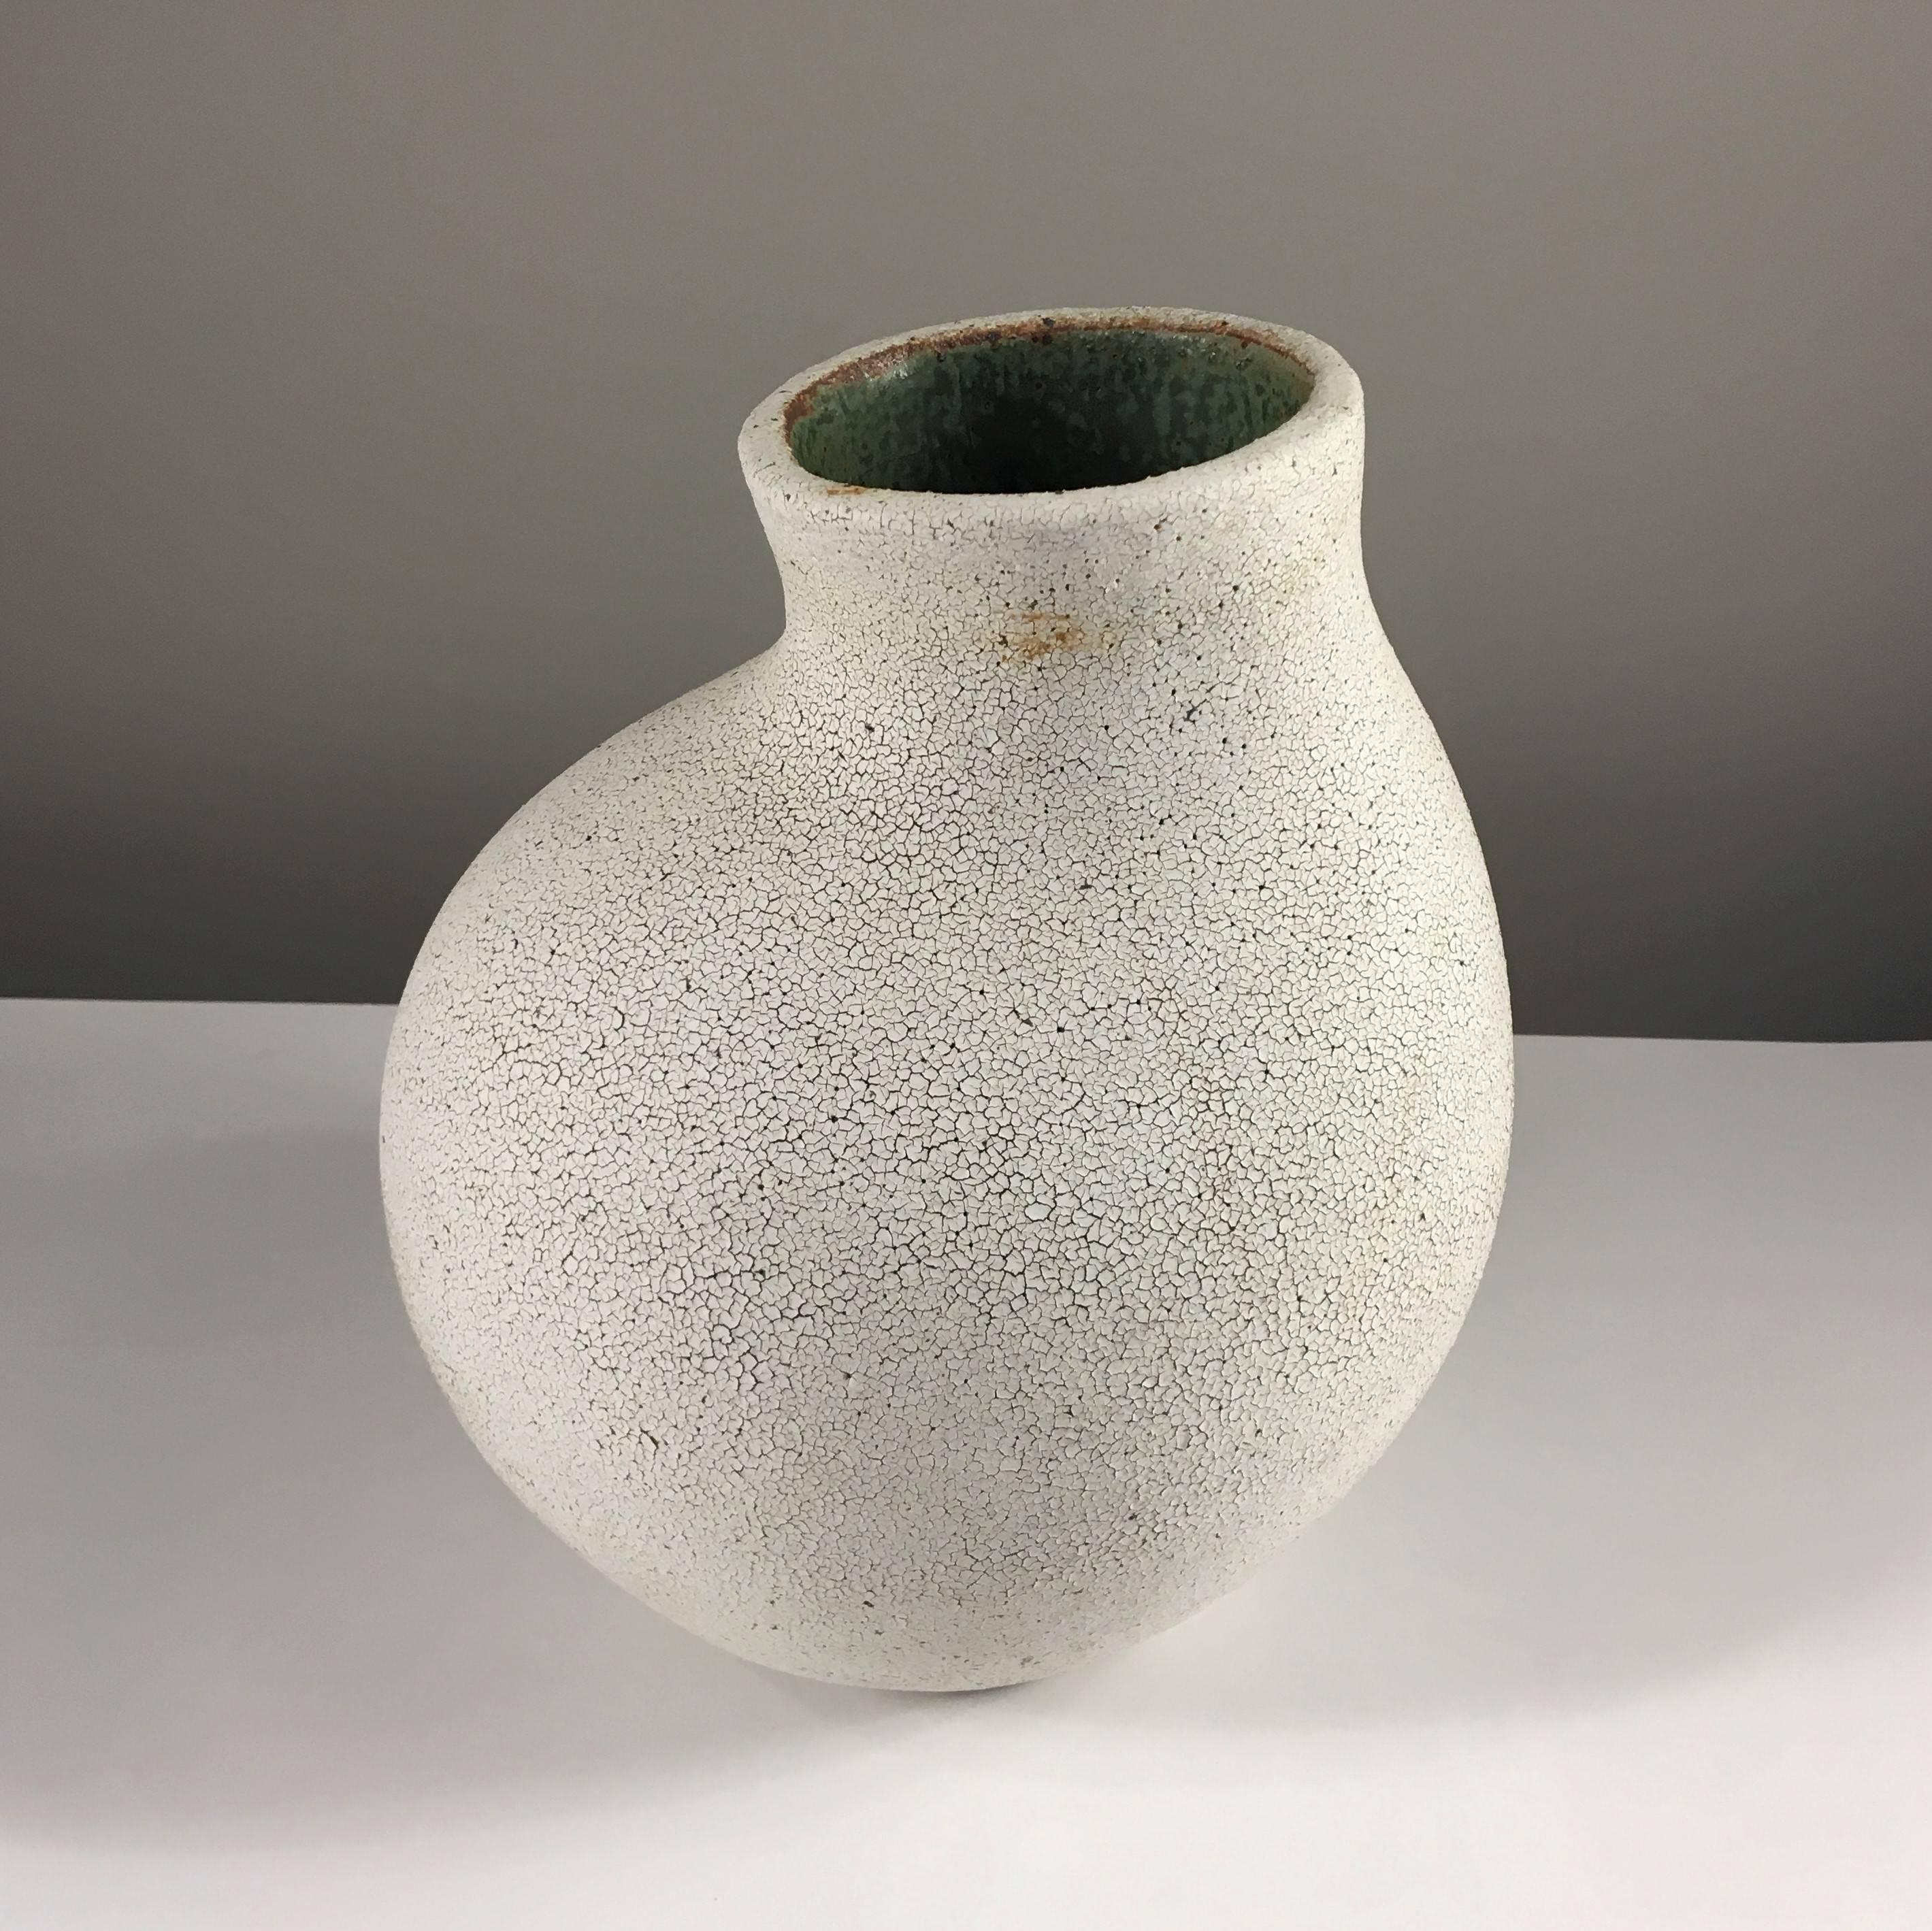 Contemporary ceramic artist Yumiko Kuga's glazed stoneware curved neck vase no. 145 is part of her Crackle Series. All of the pieces in this series are hand-built and 100% handmade so they are one-of-a-kind and thus vary slightly from one another.